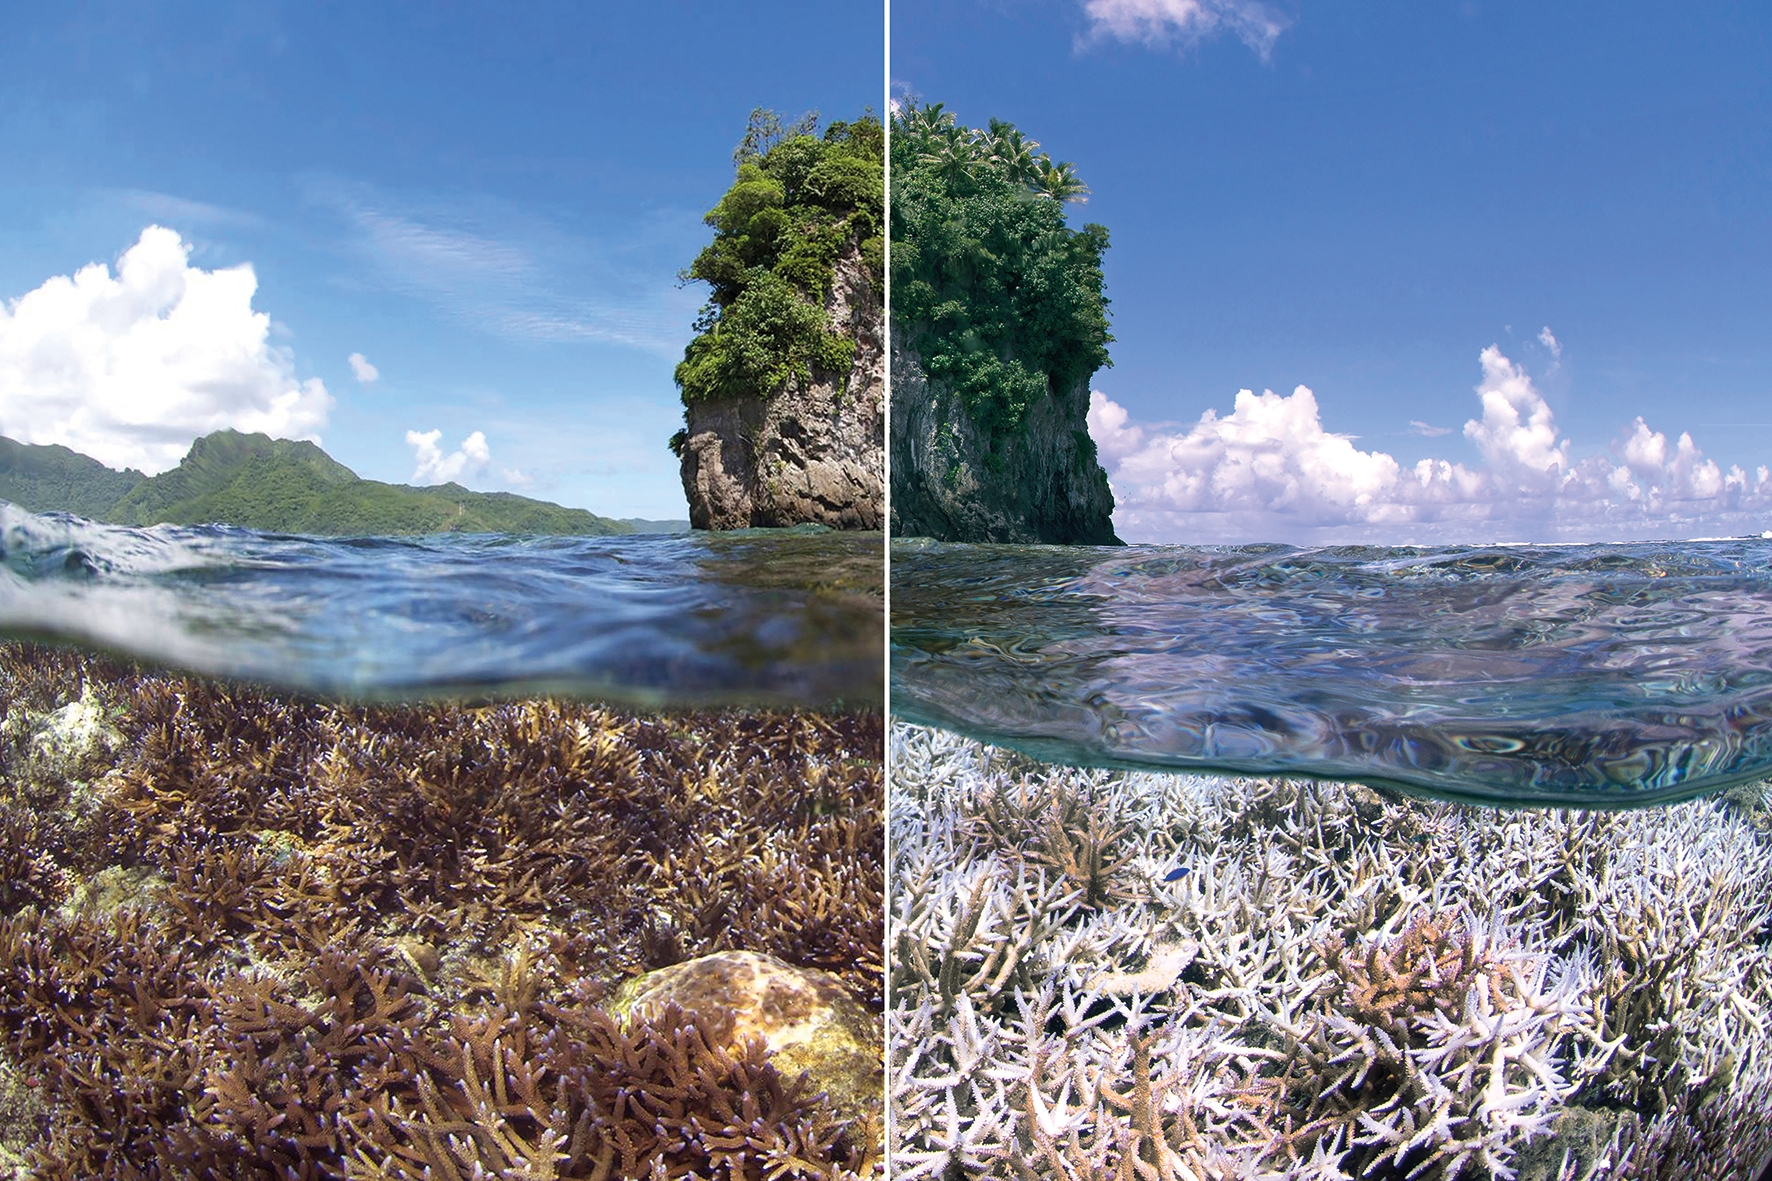 Corals and communities: EJF report highlights devastating impacts of climate crisis on reefs